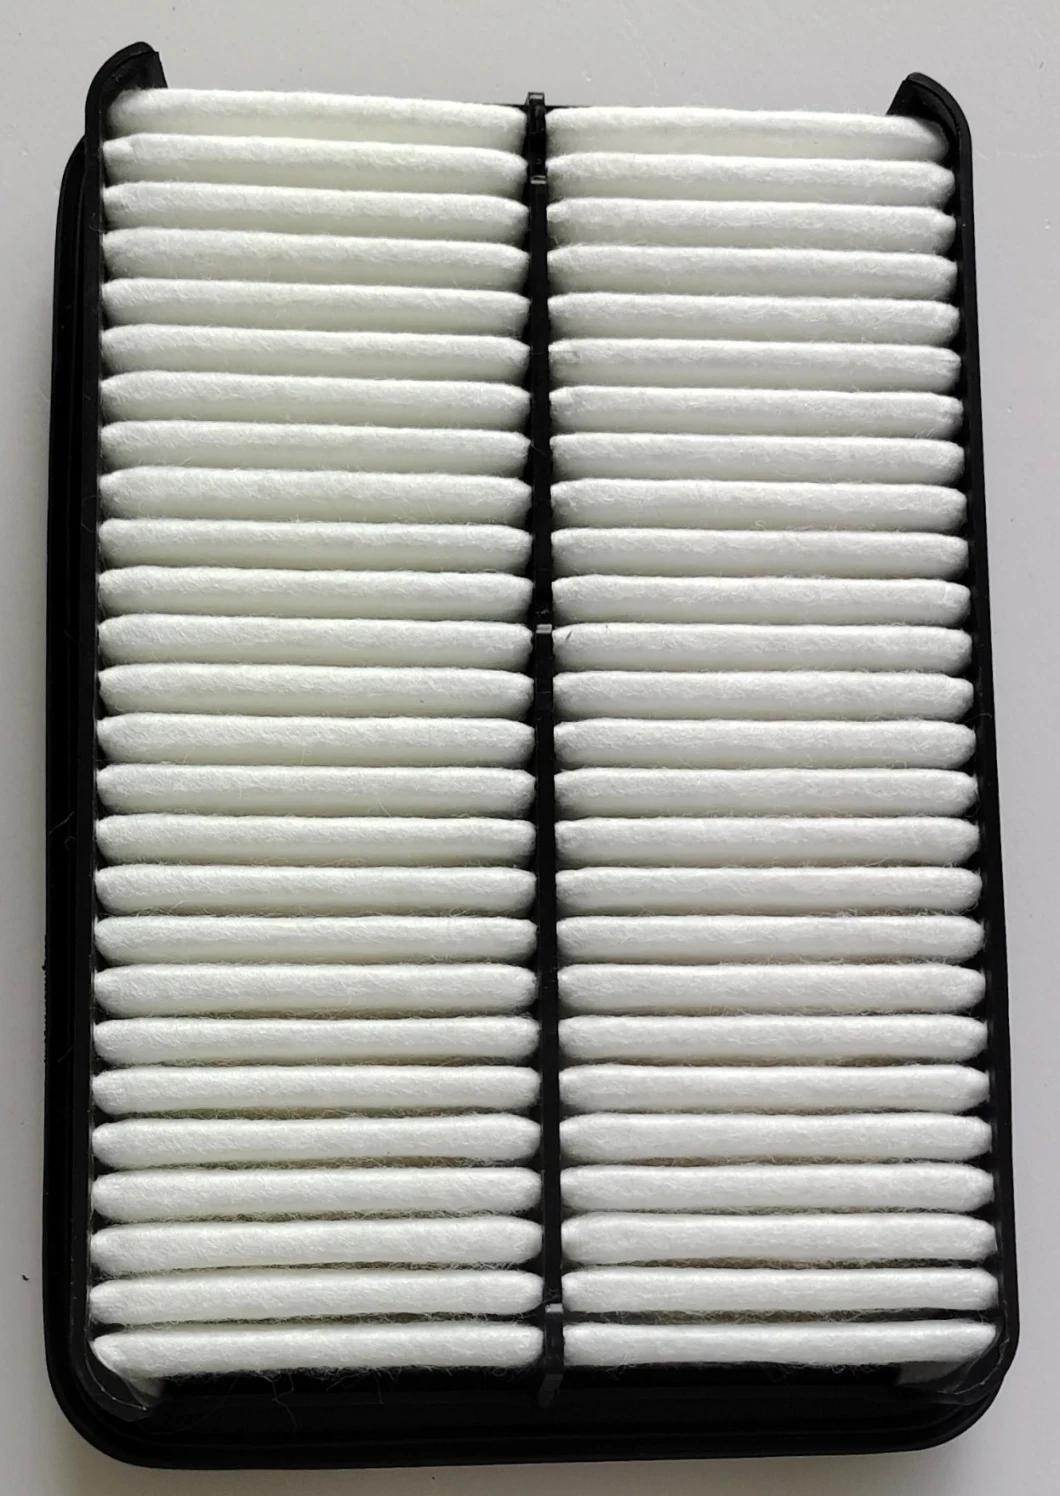 Auto Engine Accessories Part PP Air Filter Auto Filter for Mazda PE07-13-3A0a OEM B366-13-Z40 /K801-13-Z40 /K801-13-Z40